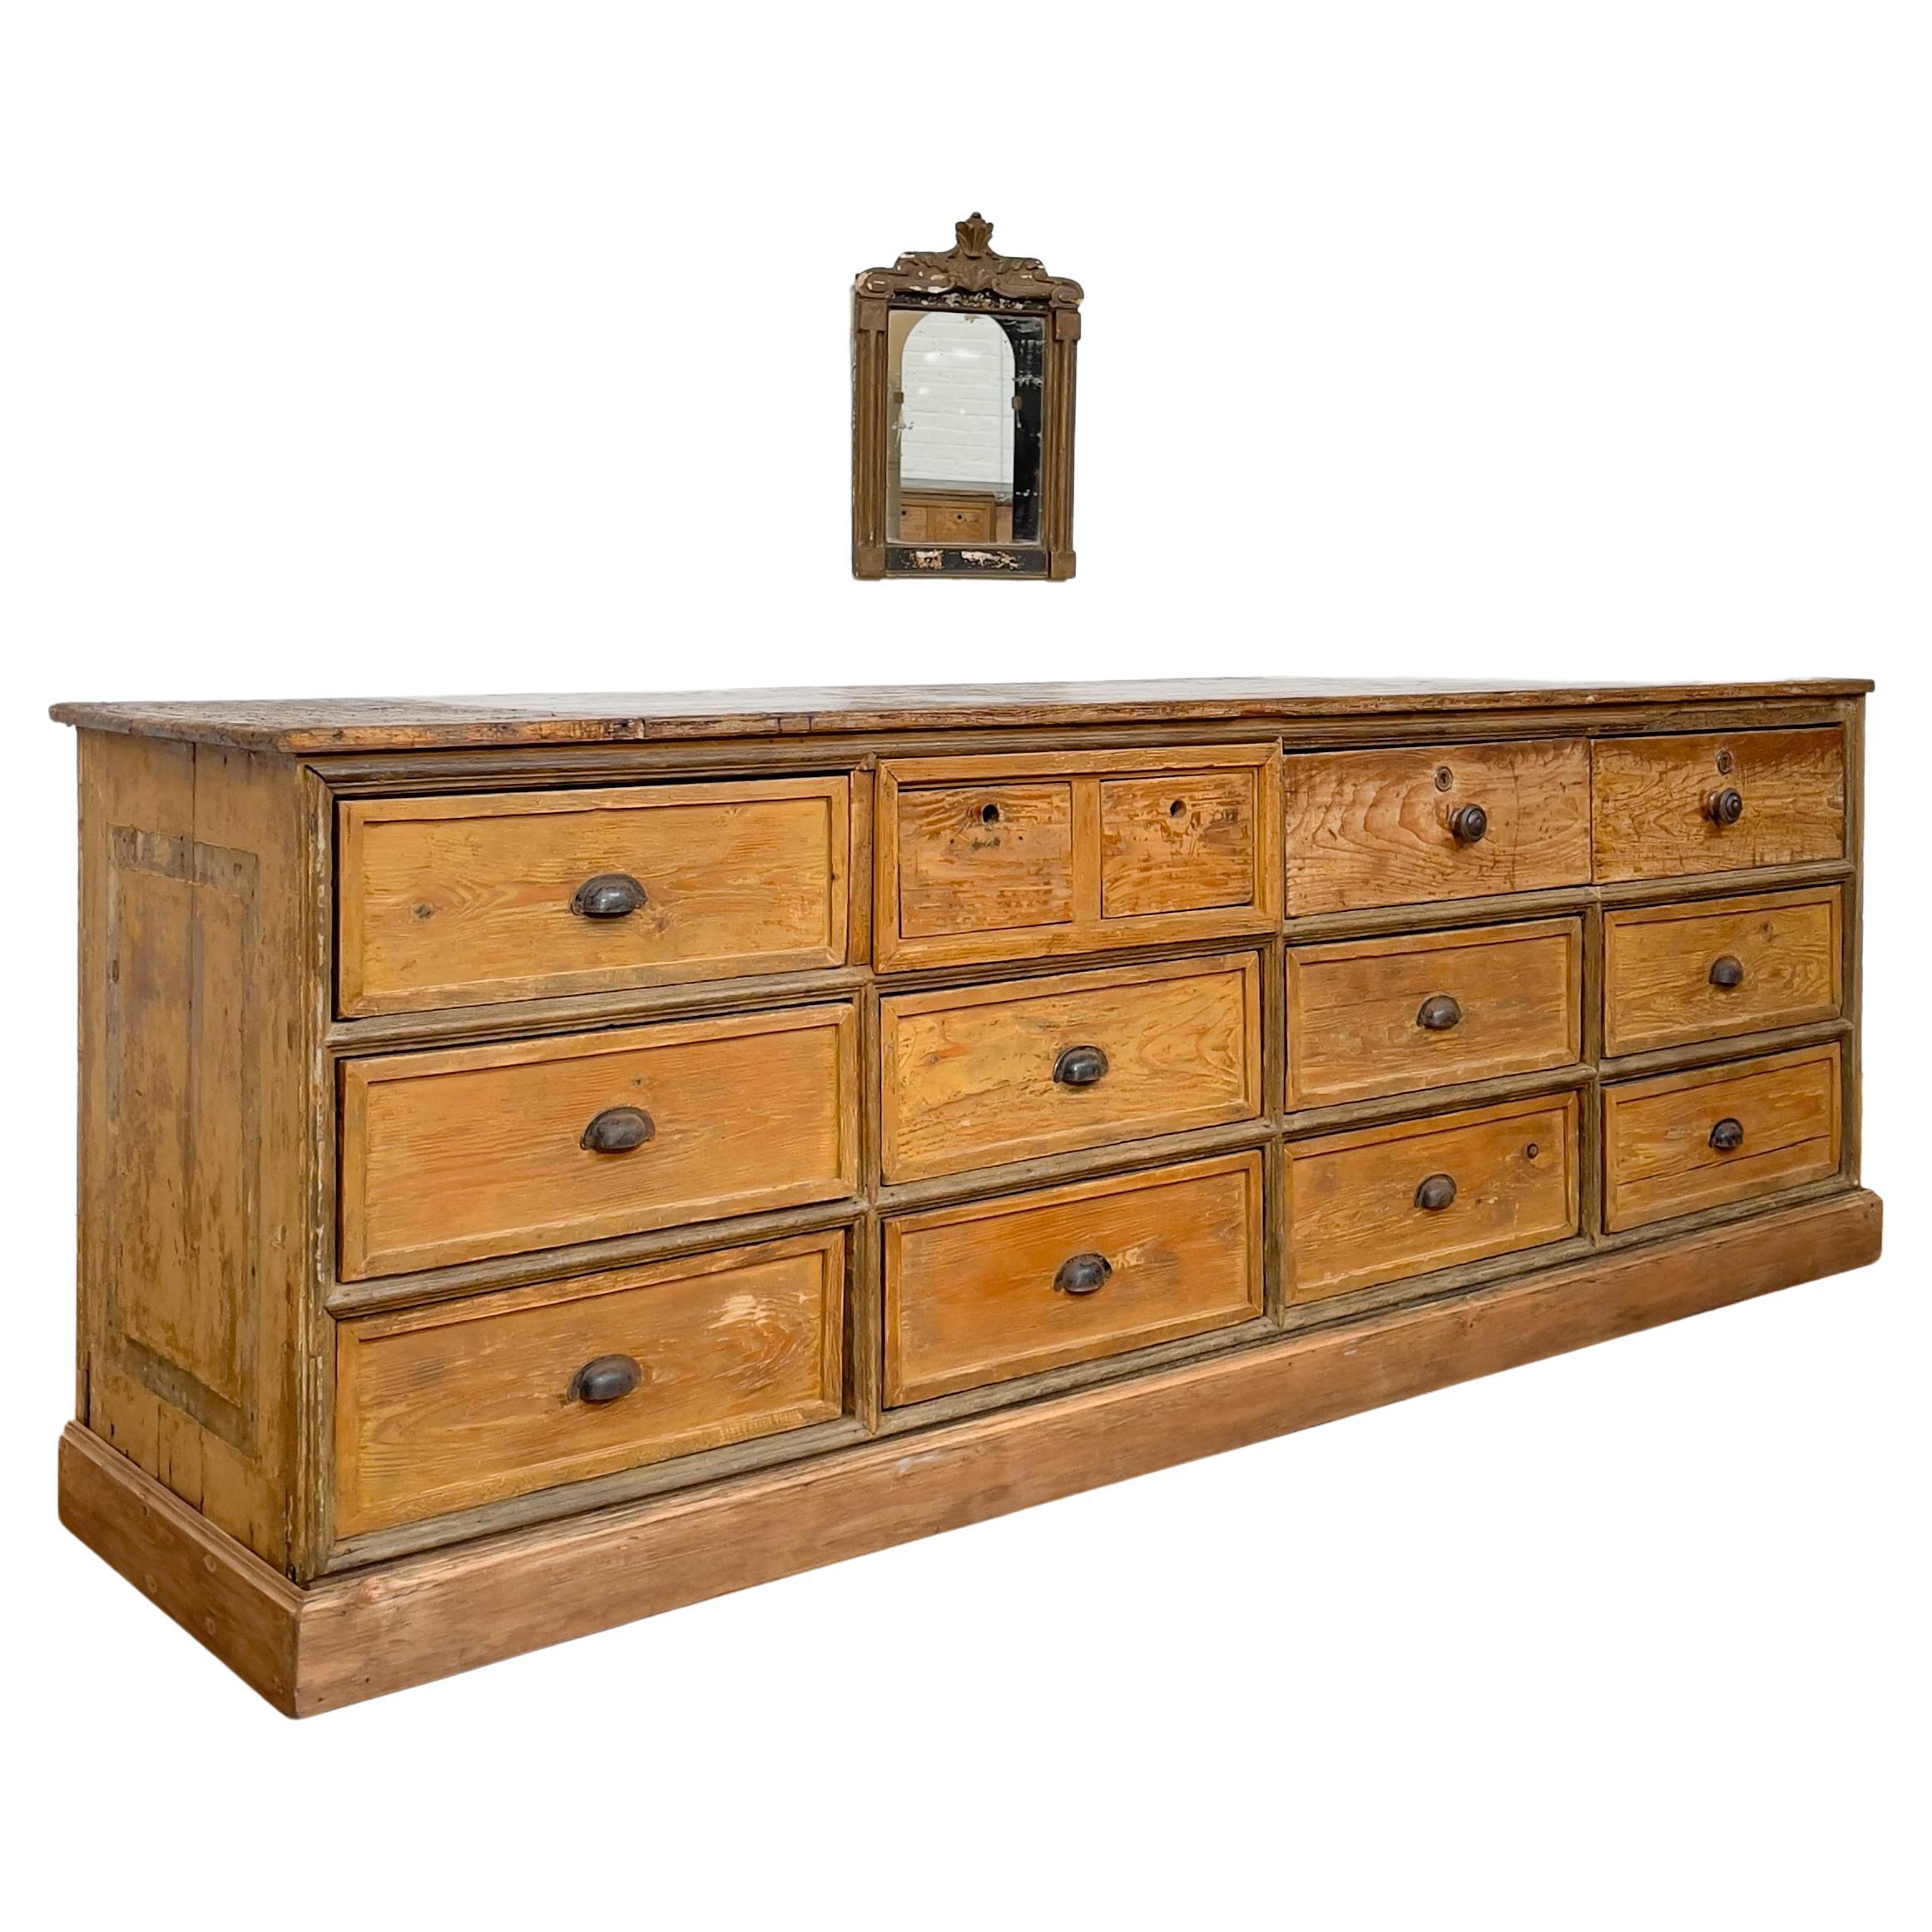 Early 20th Century French Haberdashery Cabinet with Drawers